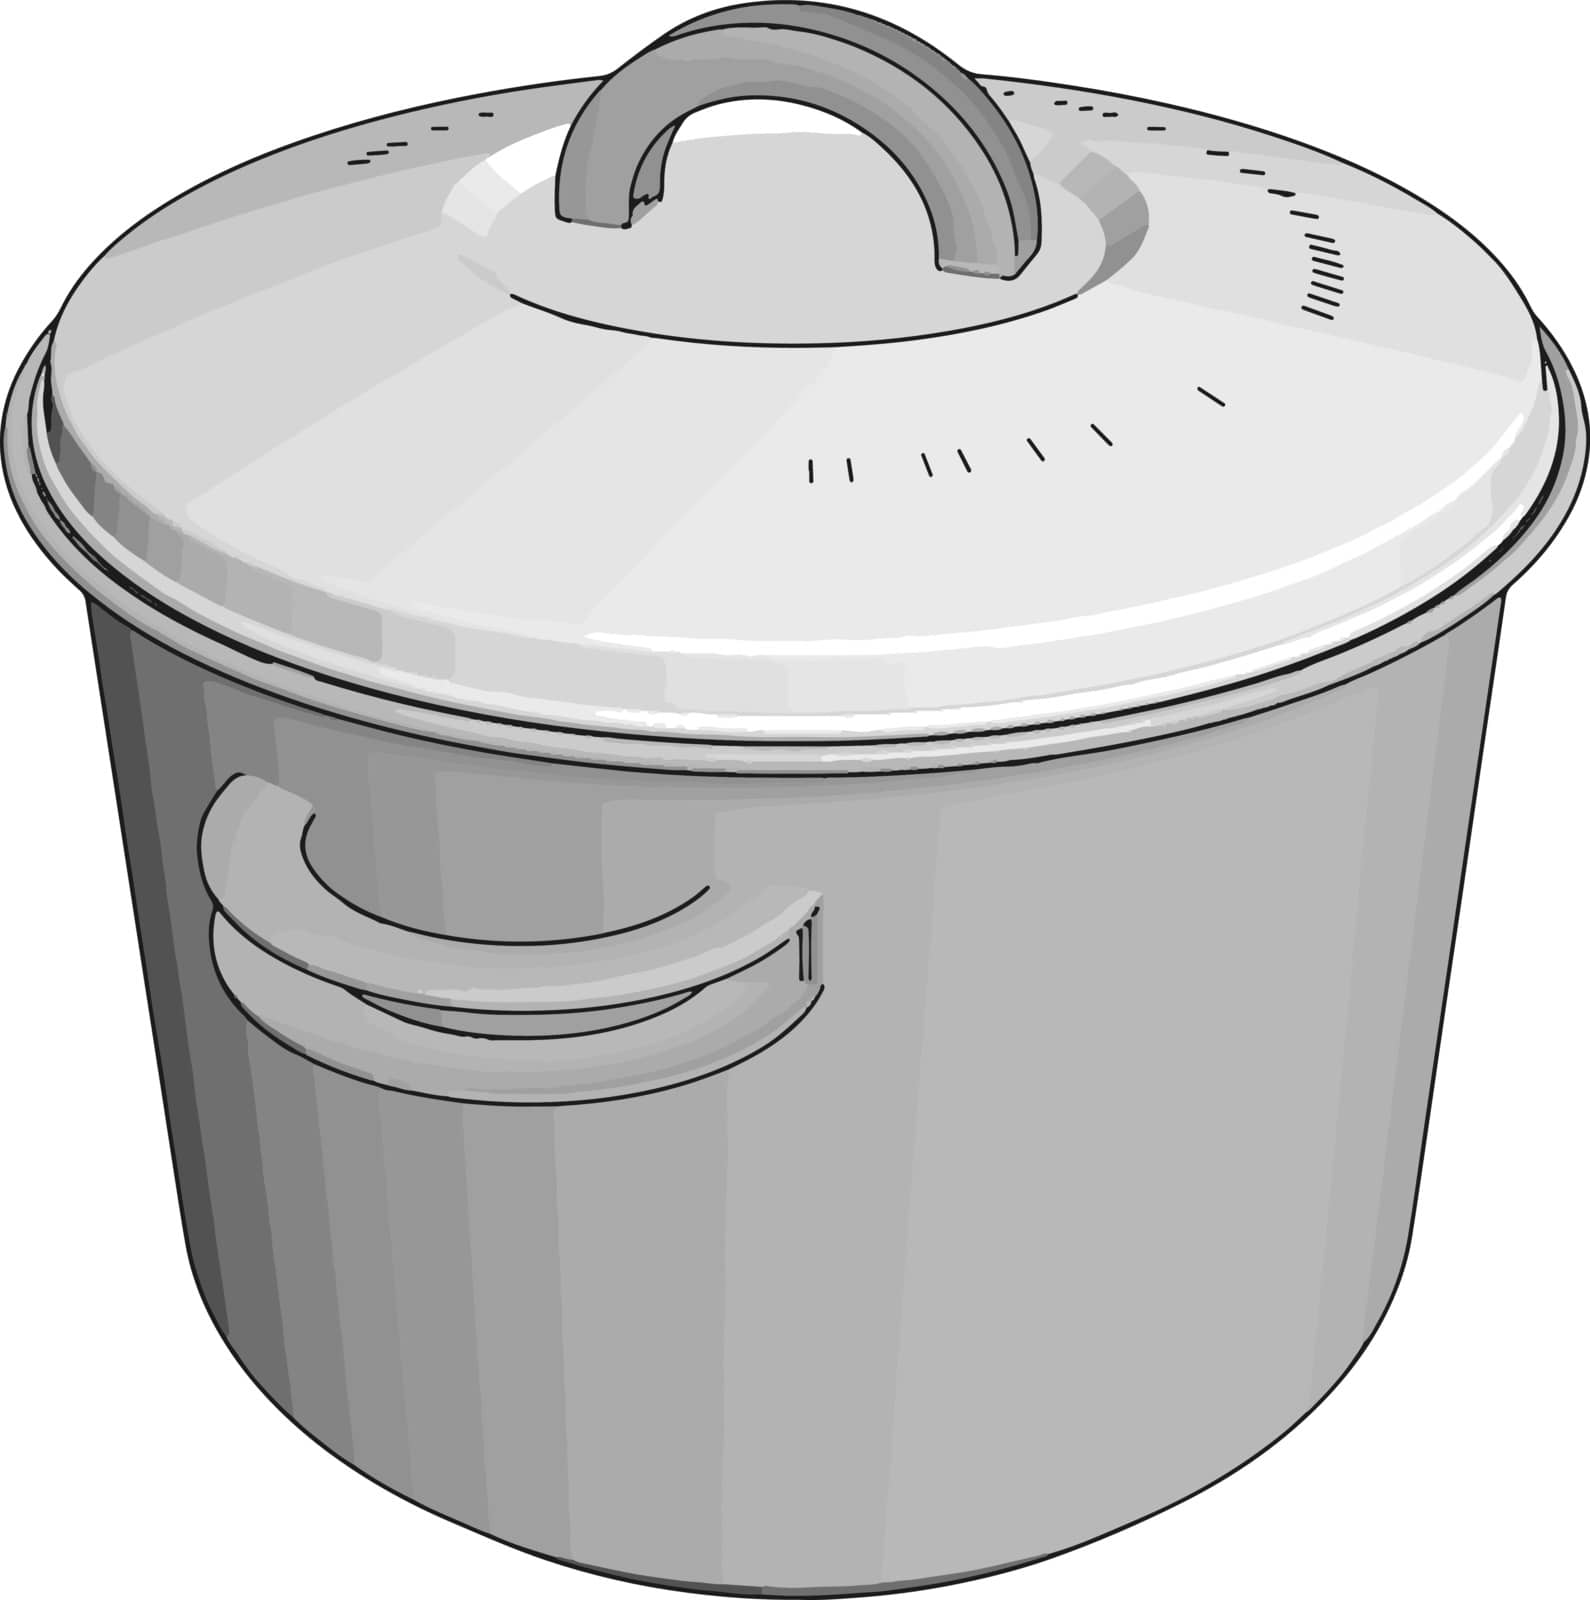 White cookware, illustration, vector on white background.